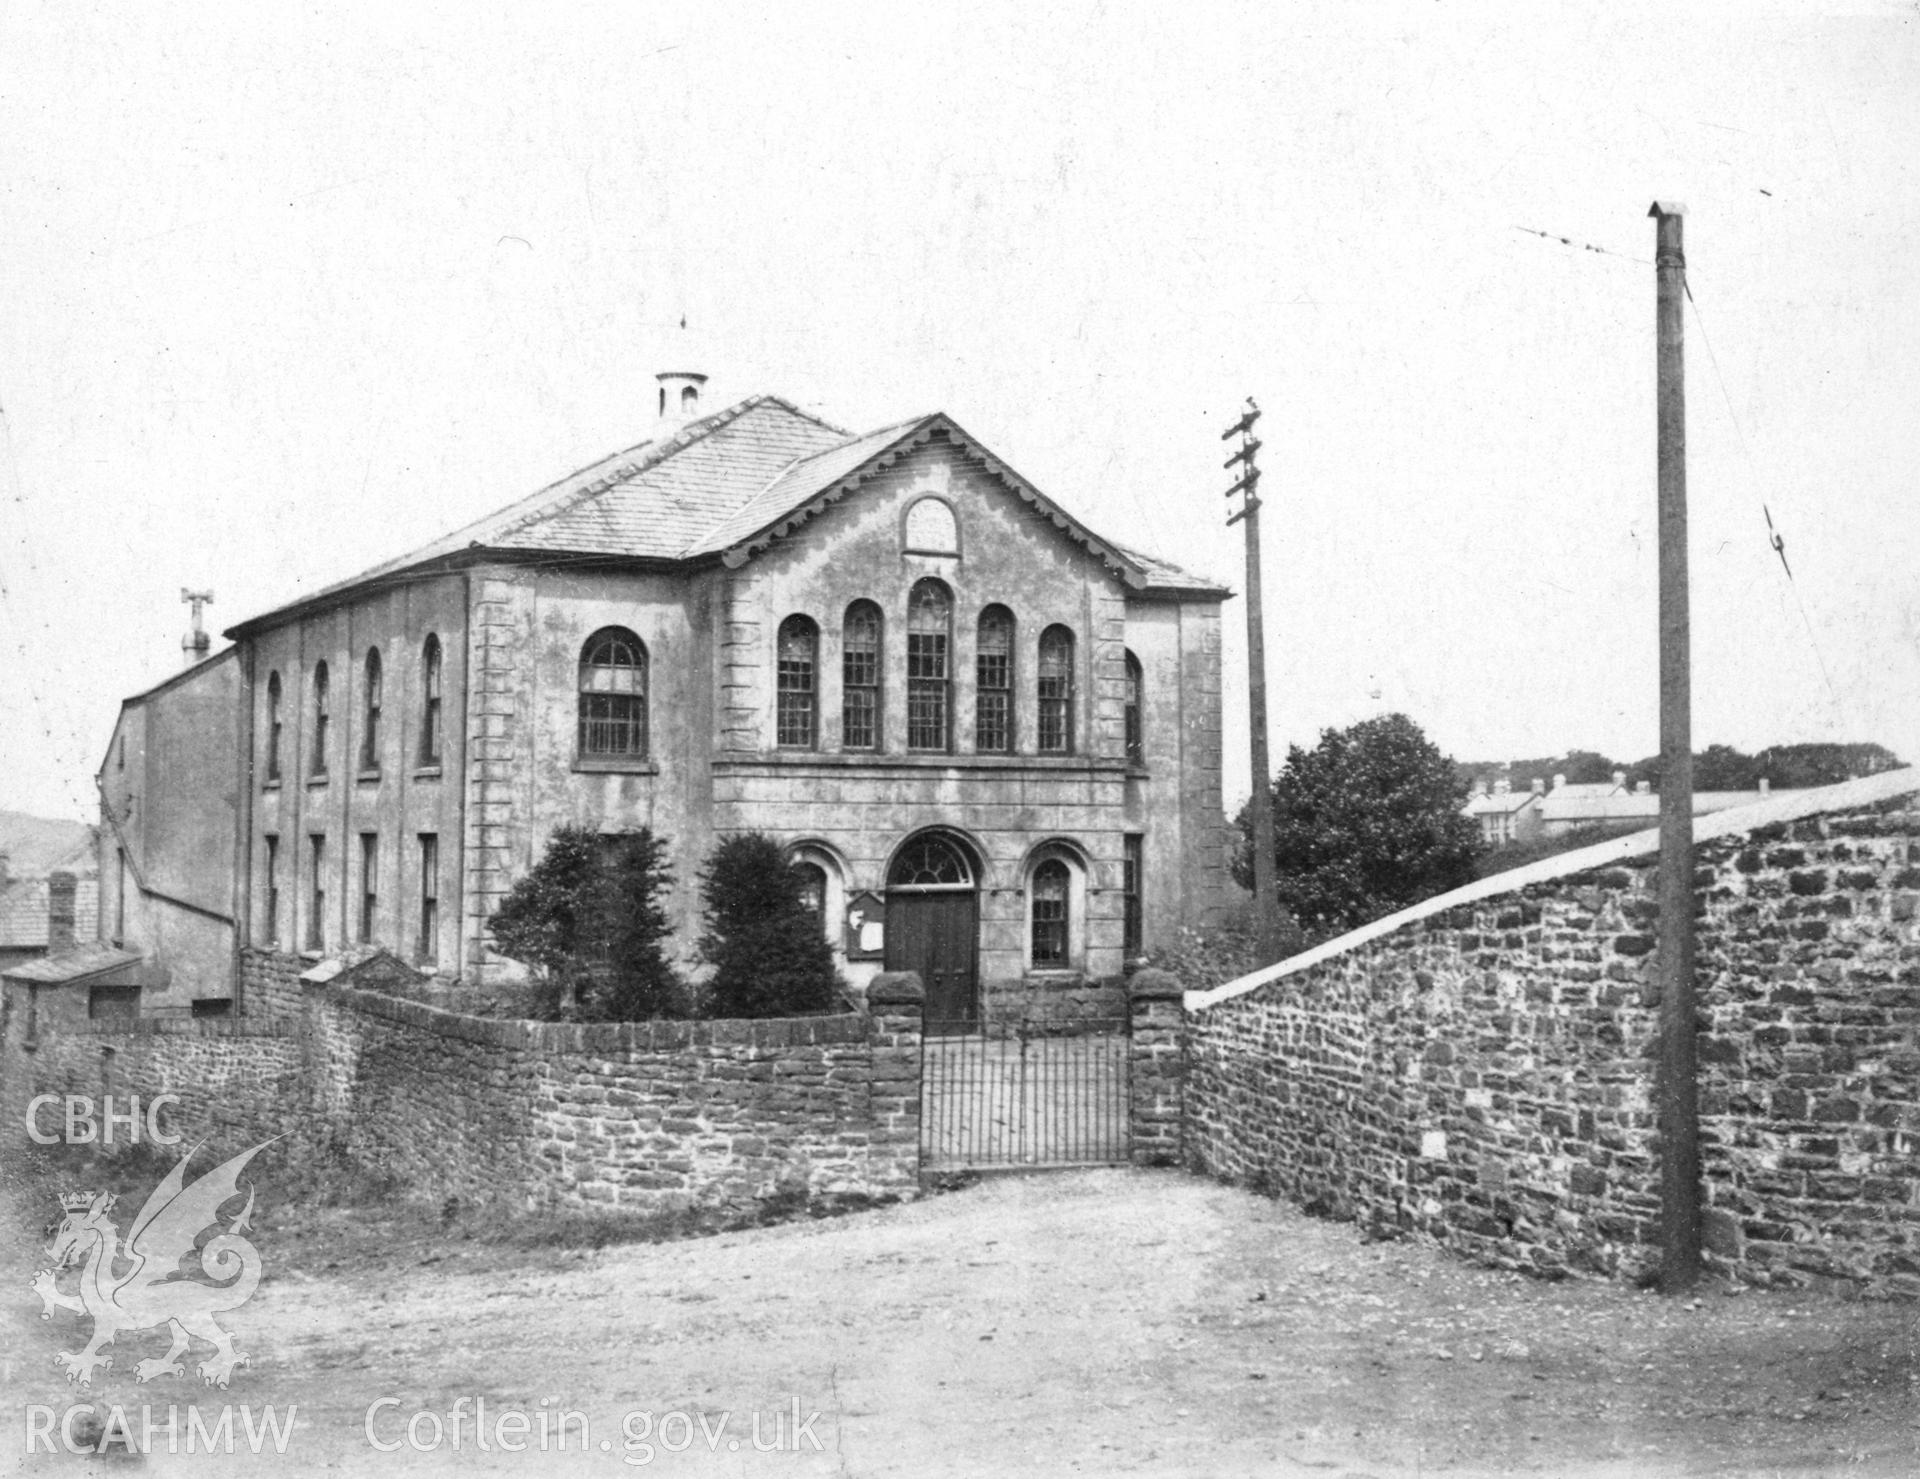 Digital copy of an undated  black and white photograph of Bethania Chapel, Cwmbach, loaned for copying by Mrs Delyth Wilson.